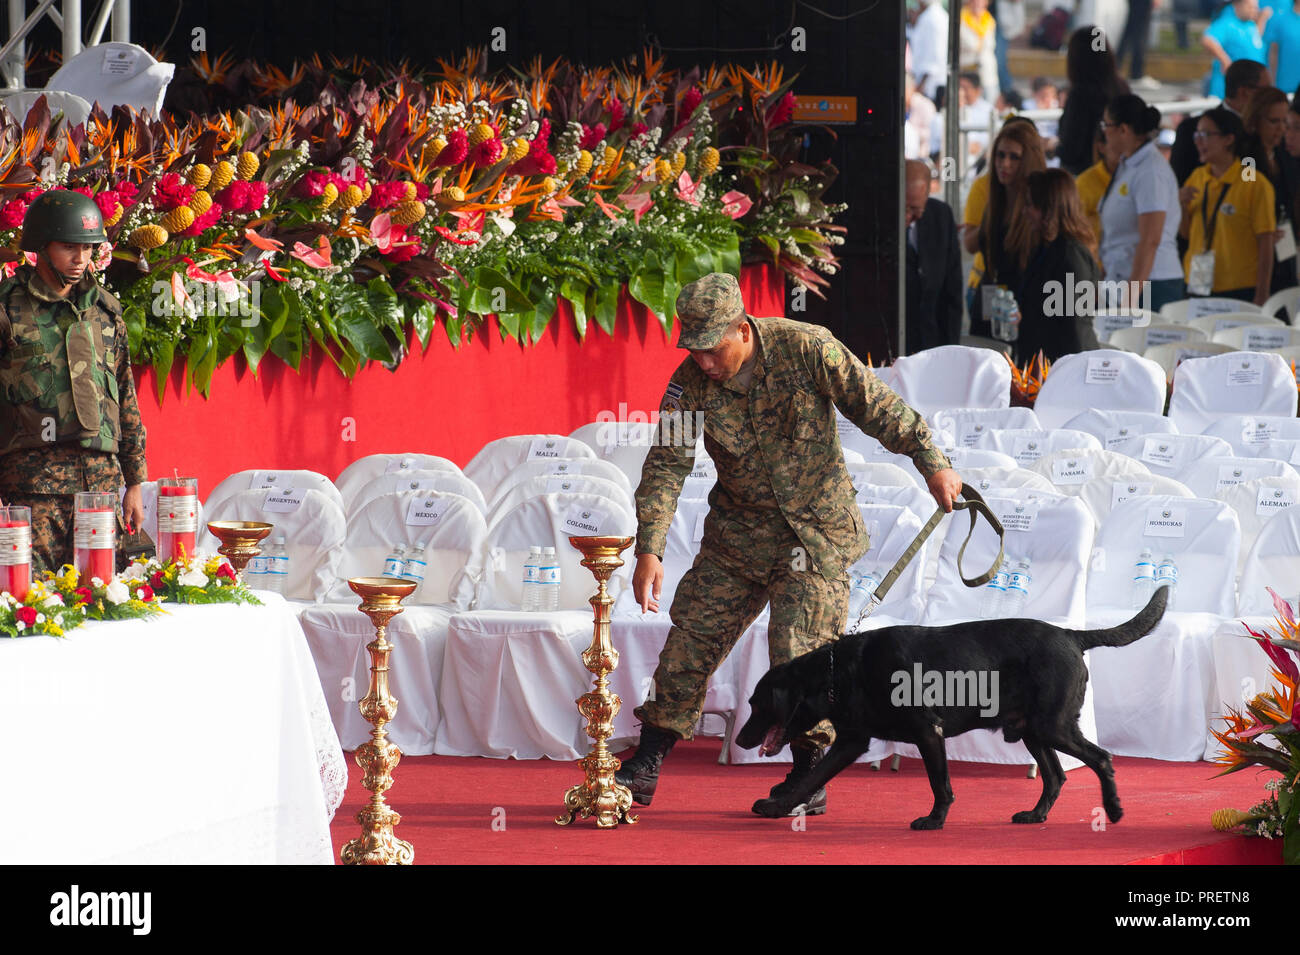 A soldier with a bomb sniffing dog inspects the area around the alter at San Salvador's Plaza Salvador del Mundo - site of the martyred Archbishop Romero's beatification mass. No violence was reported at Saturdsy's event. El Salvador celebrated the ceremony and mass announcing the beatification of Archbishop Oscar Romero. The Archbishop was slain at the alter of his Church of the Divine Providence by a right wing gunman in 1980. Oscar Arnulfo Romero y Galdamez became the fourth Archbishop of San Salvador, succeeding Luis Chavez, and spoke out against poverty, social injustice, assassinations a Stock Photo